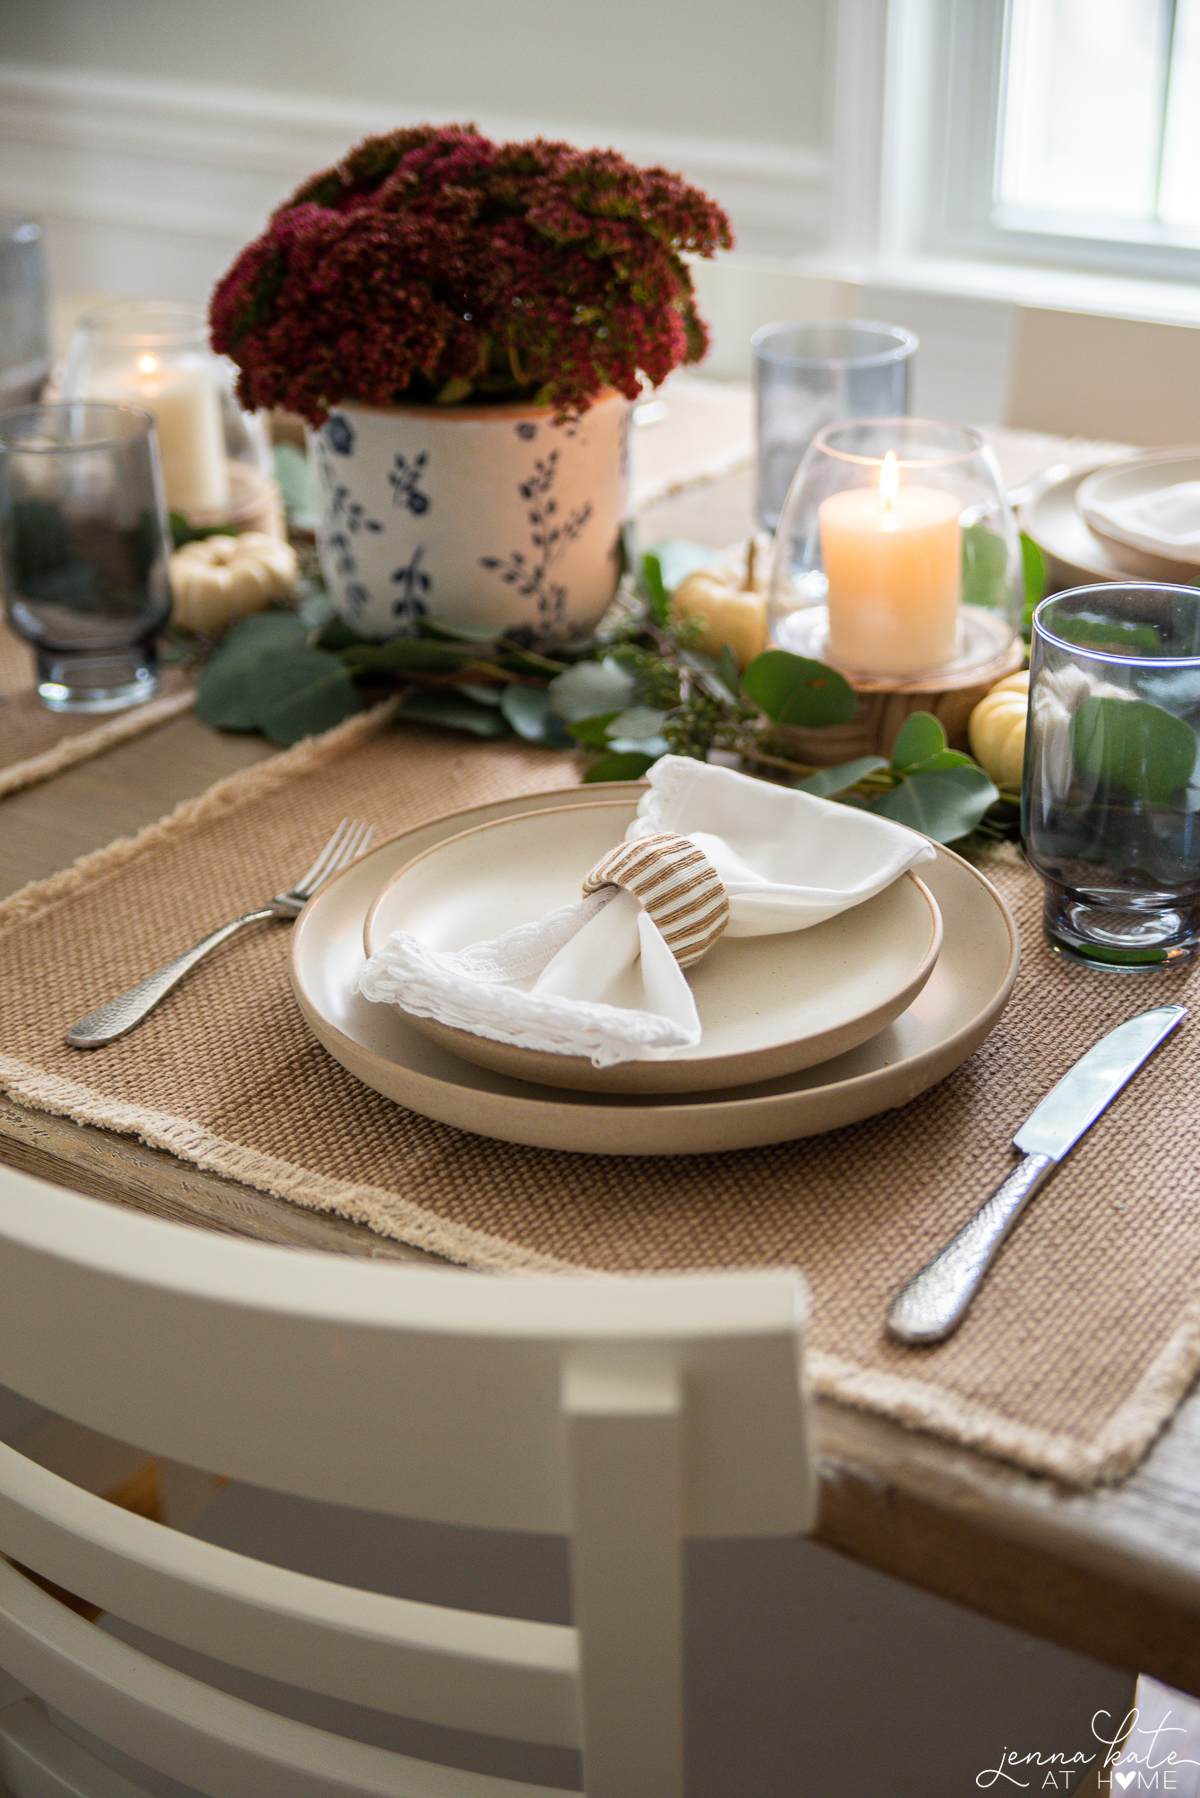 dinnerware set with white napkin on the plate and silverware on the placemat